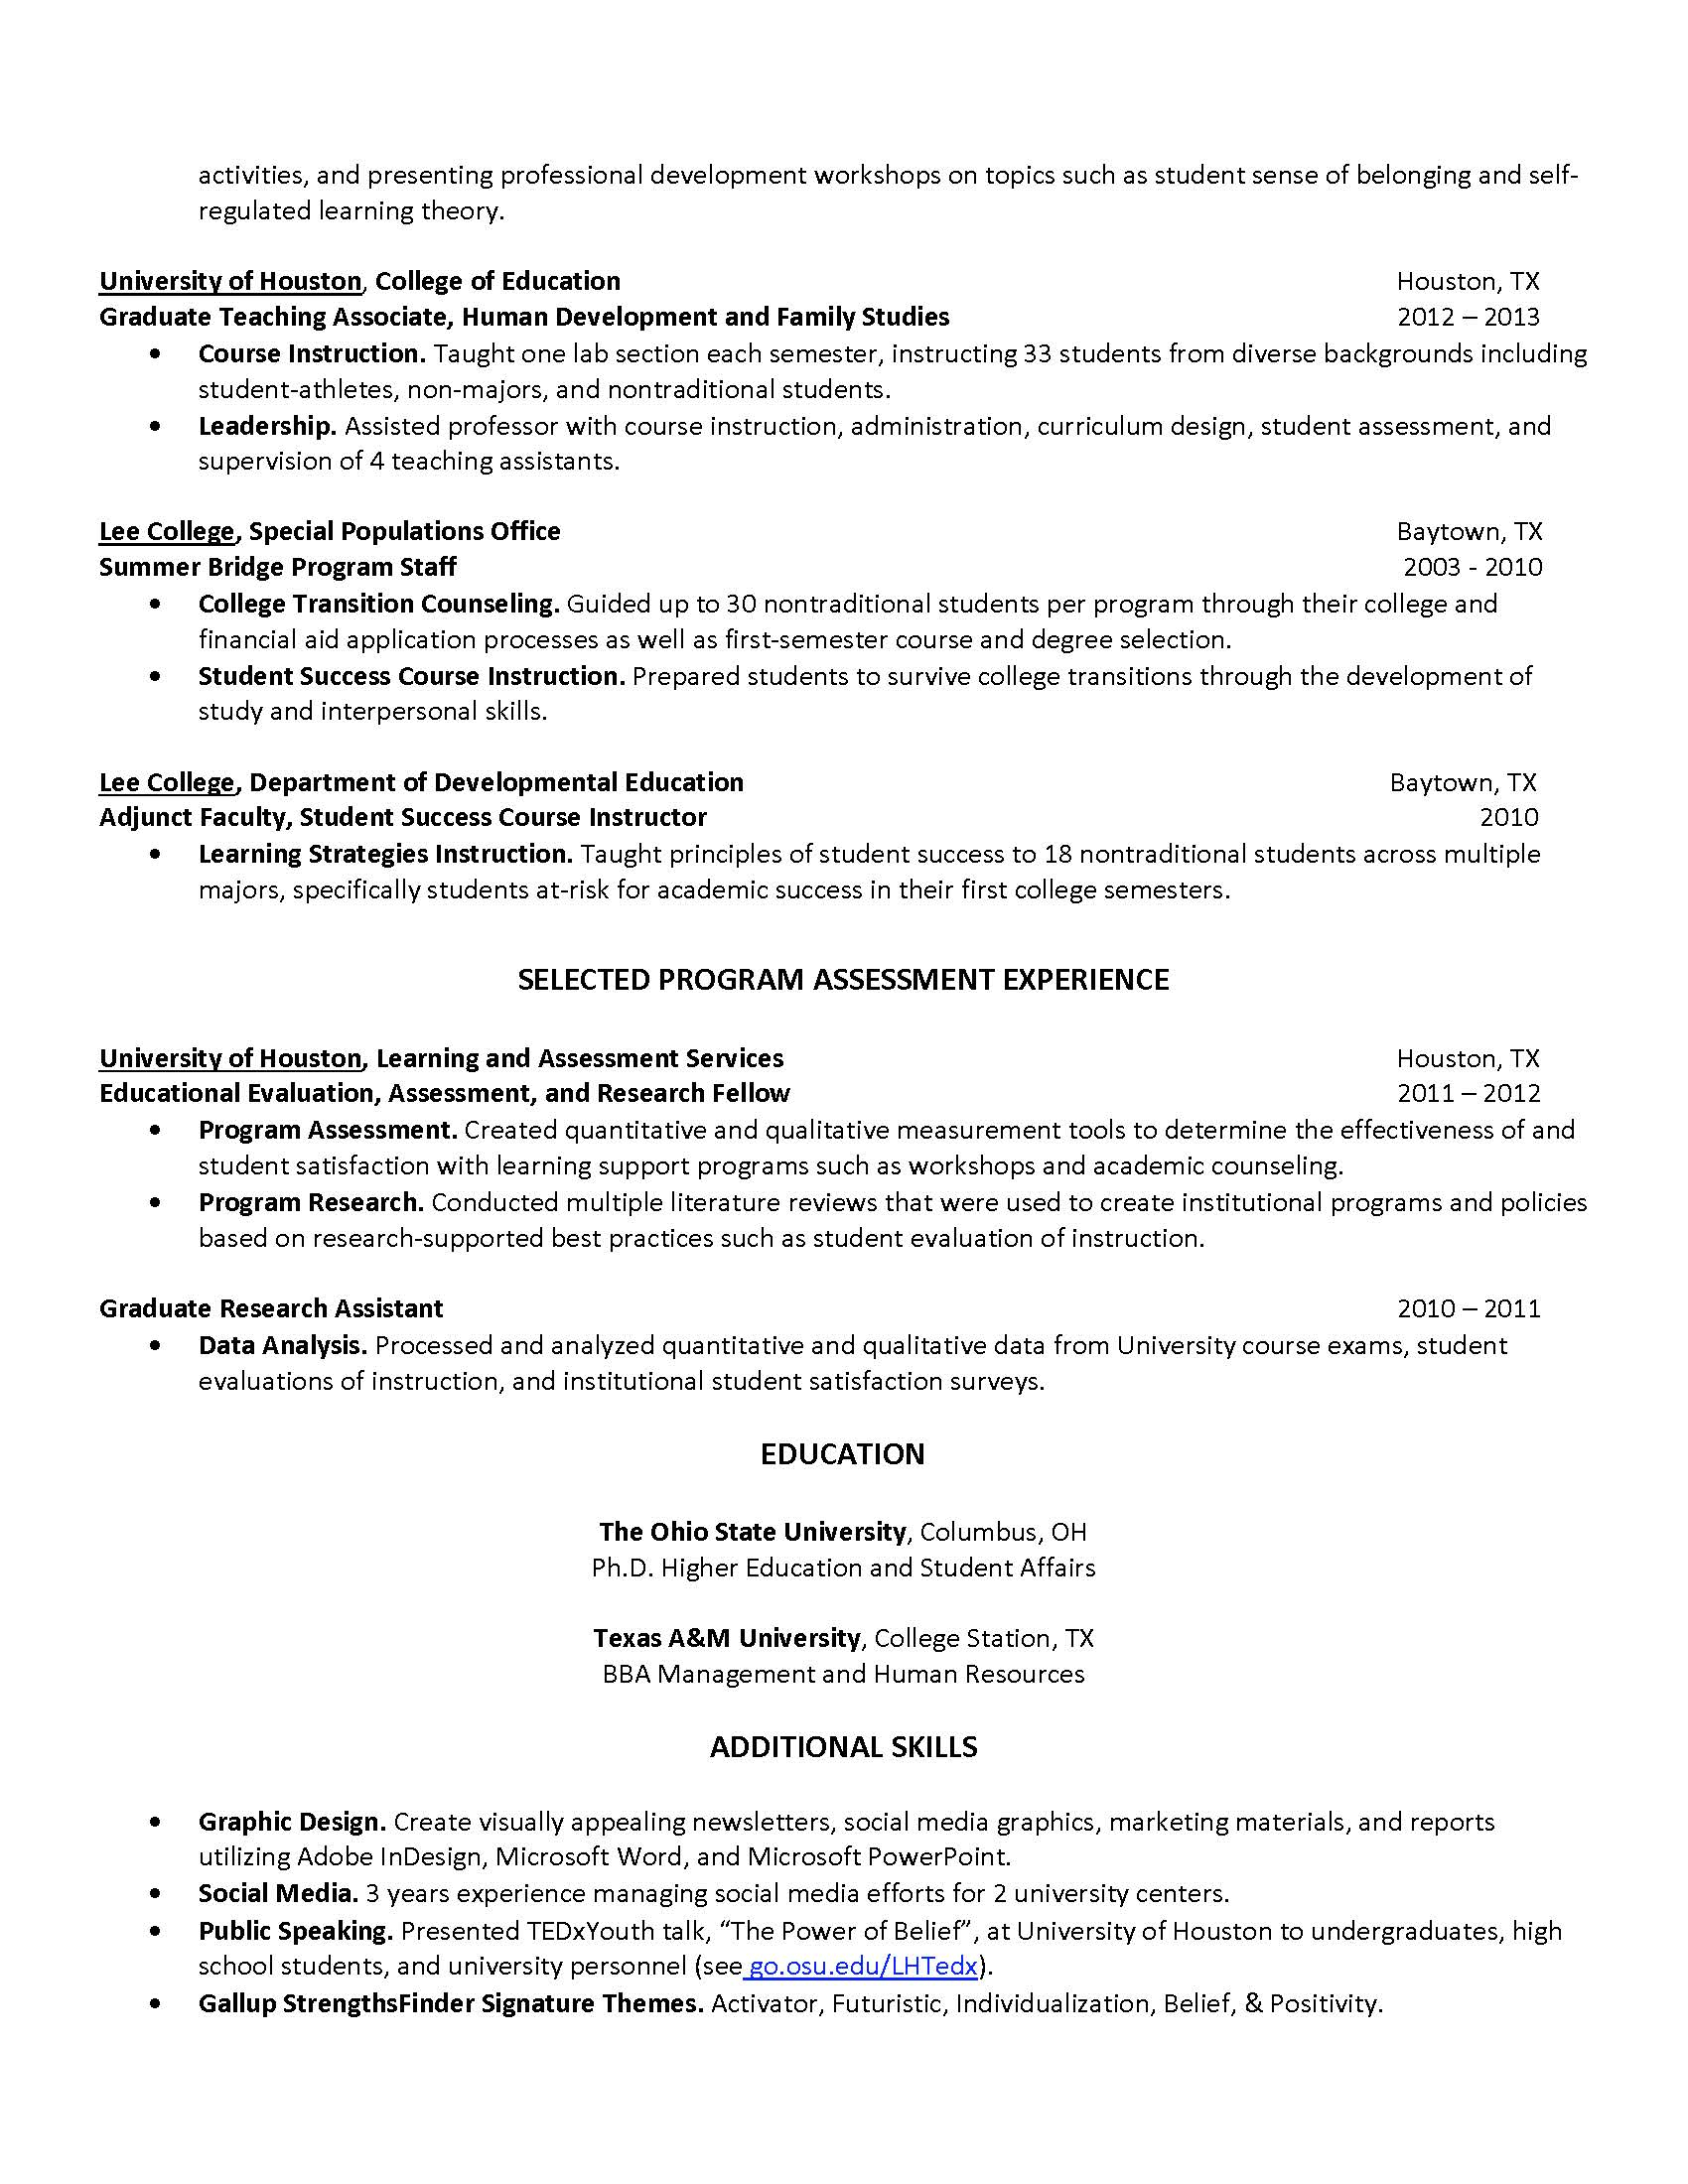 Resumes And Cover Letters Ohio State Alumni Association within sizing 1700 X 2200